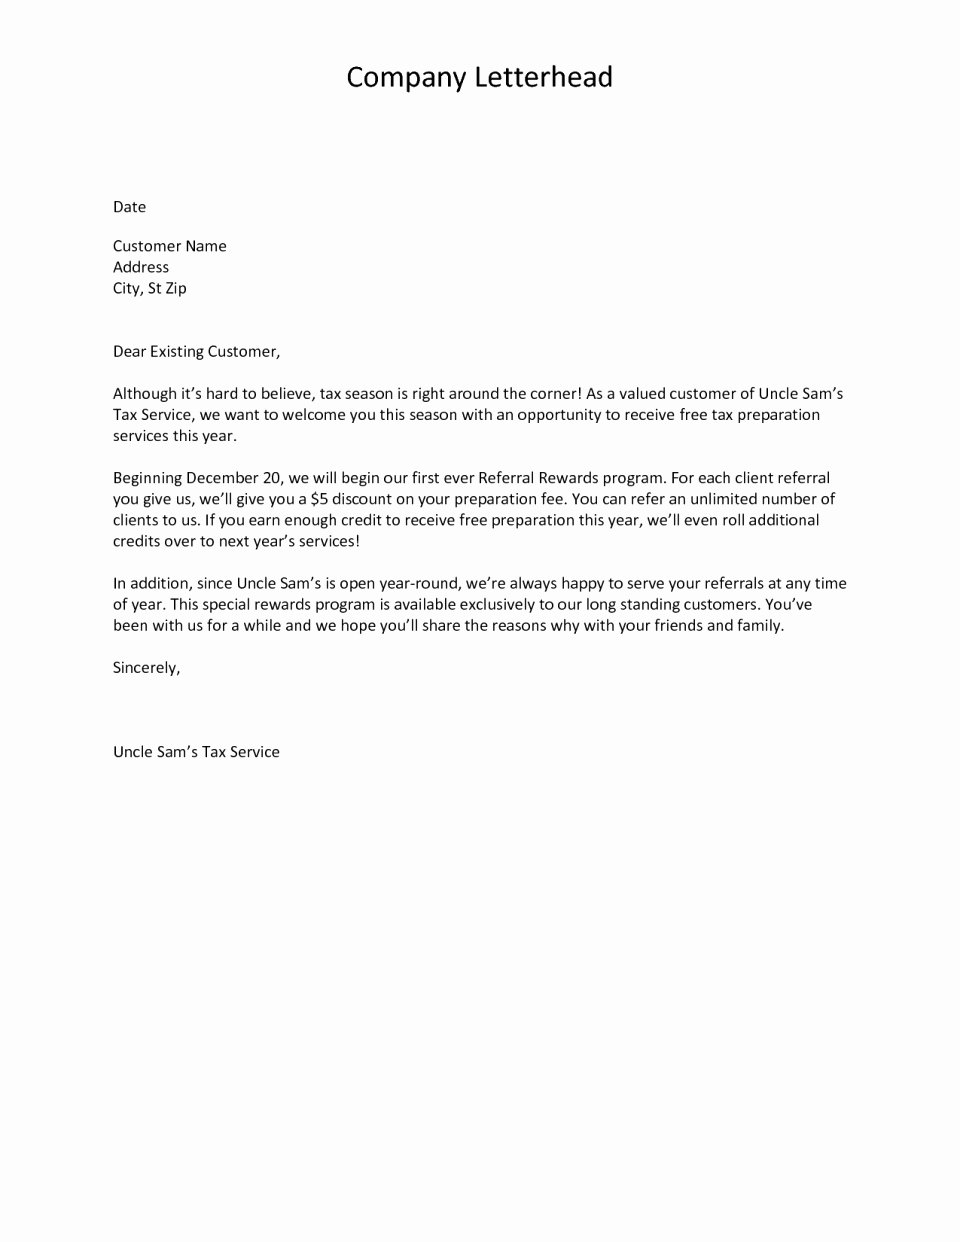 Real Estate Letter Templates New Free Expired Listing Letter Template Examples